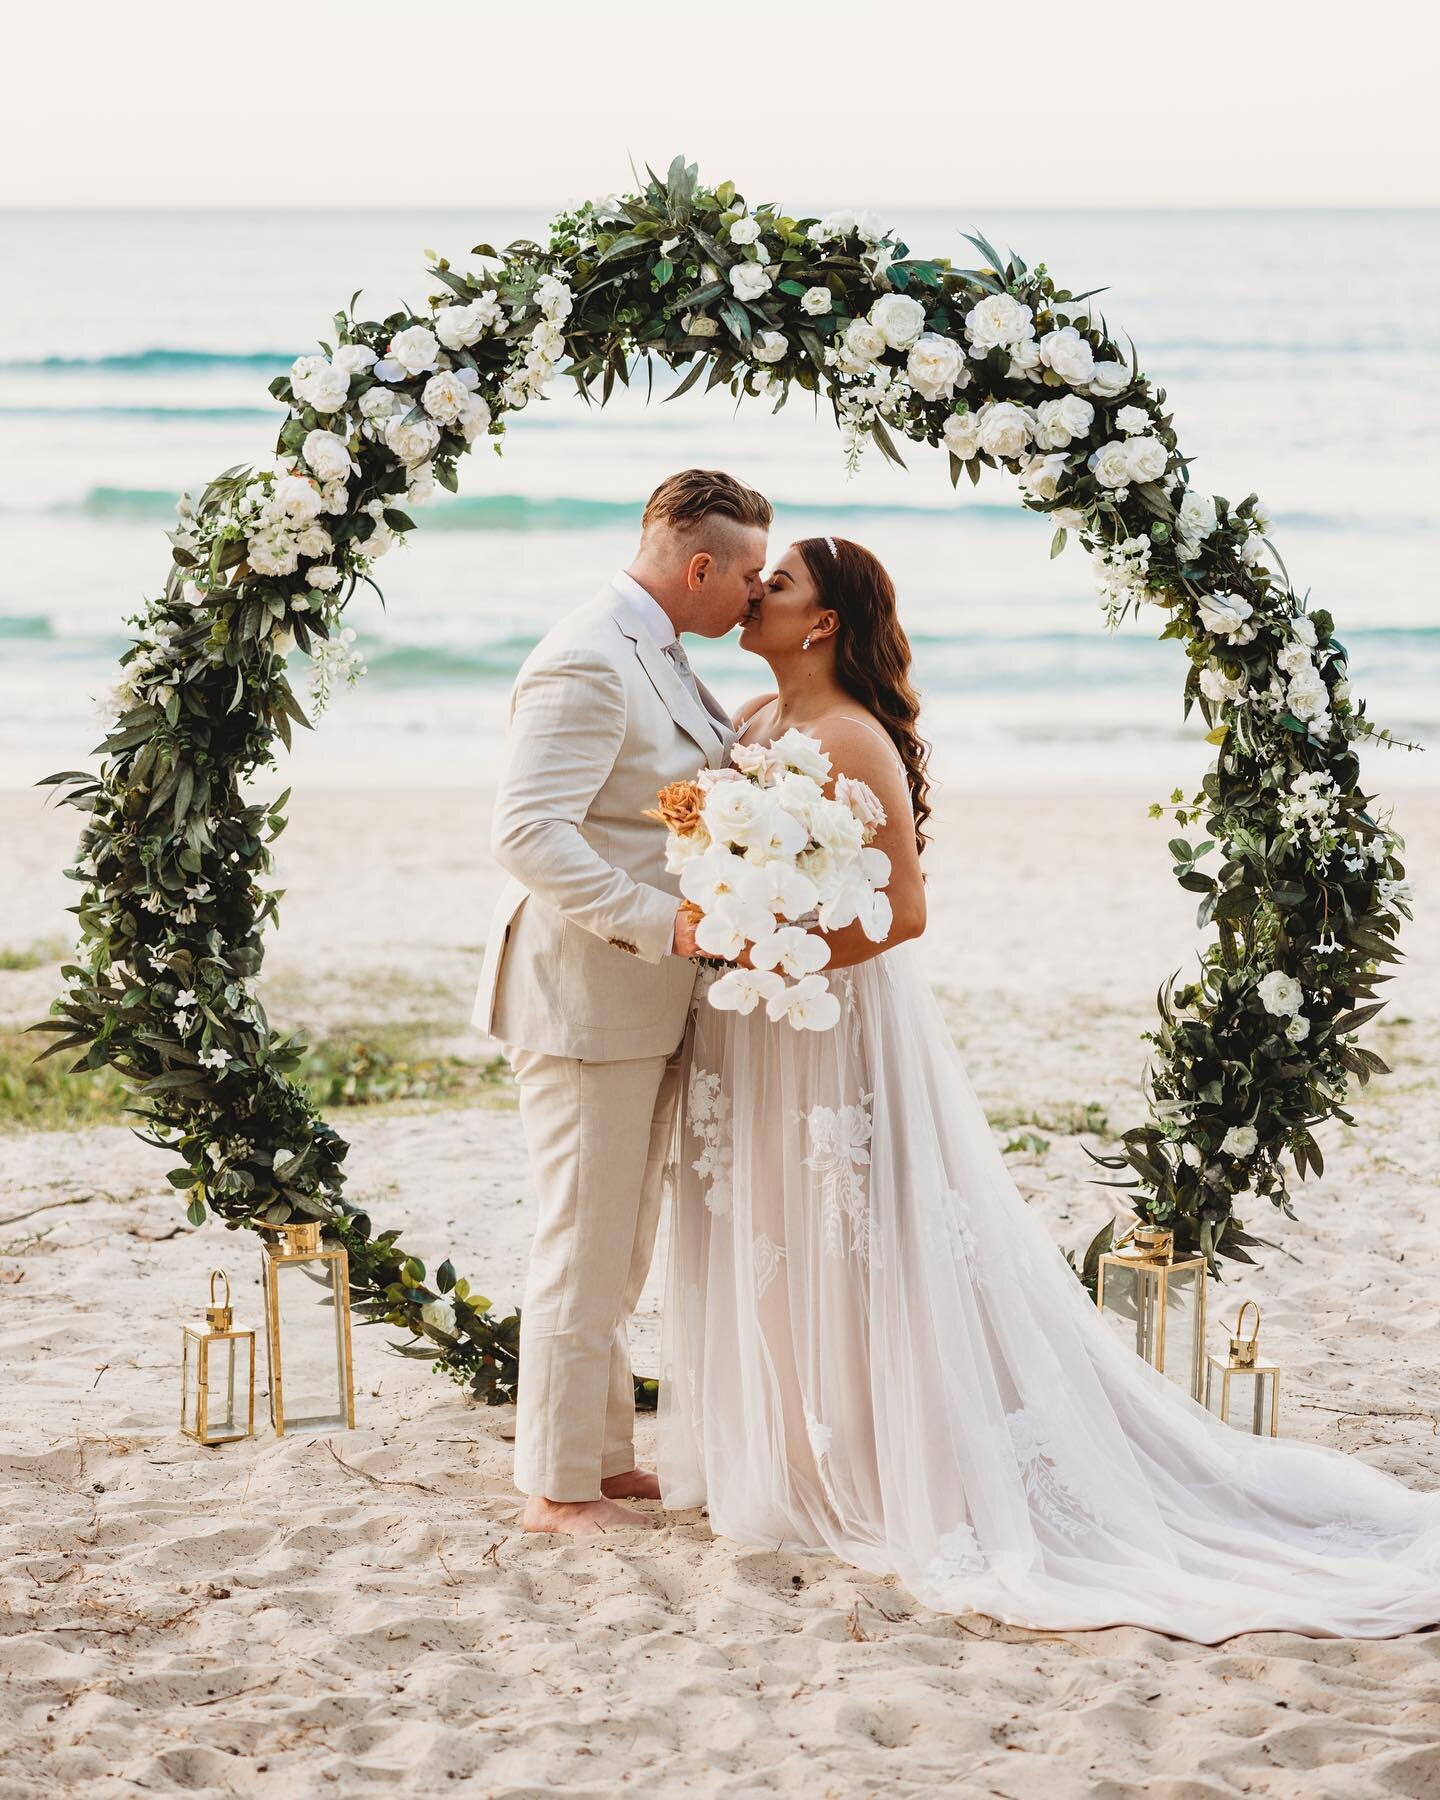 Congratulations to Jocelyn + Jacob🌹
Eloping at beautiful Beach Access 14/15 with our full arch flower styling 🤍
Celebrant @noosaheadscelebrant 
Photographer @leahcohenphotography 
Hair and makeup @beauty.on.the.move 

#elopetonoosa #justmarried #no